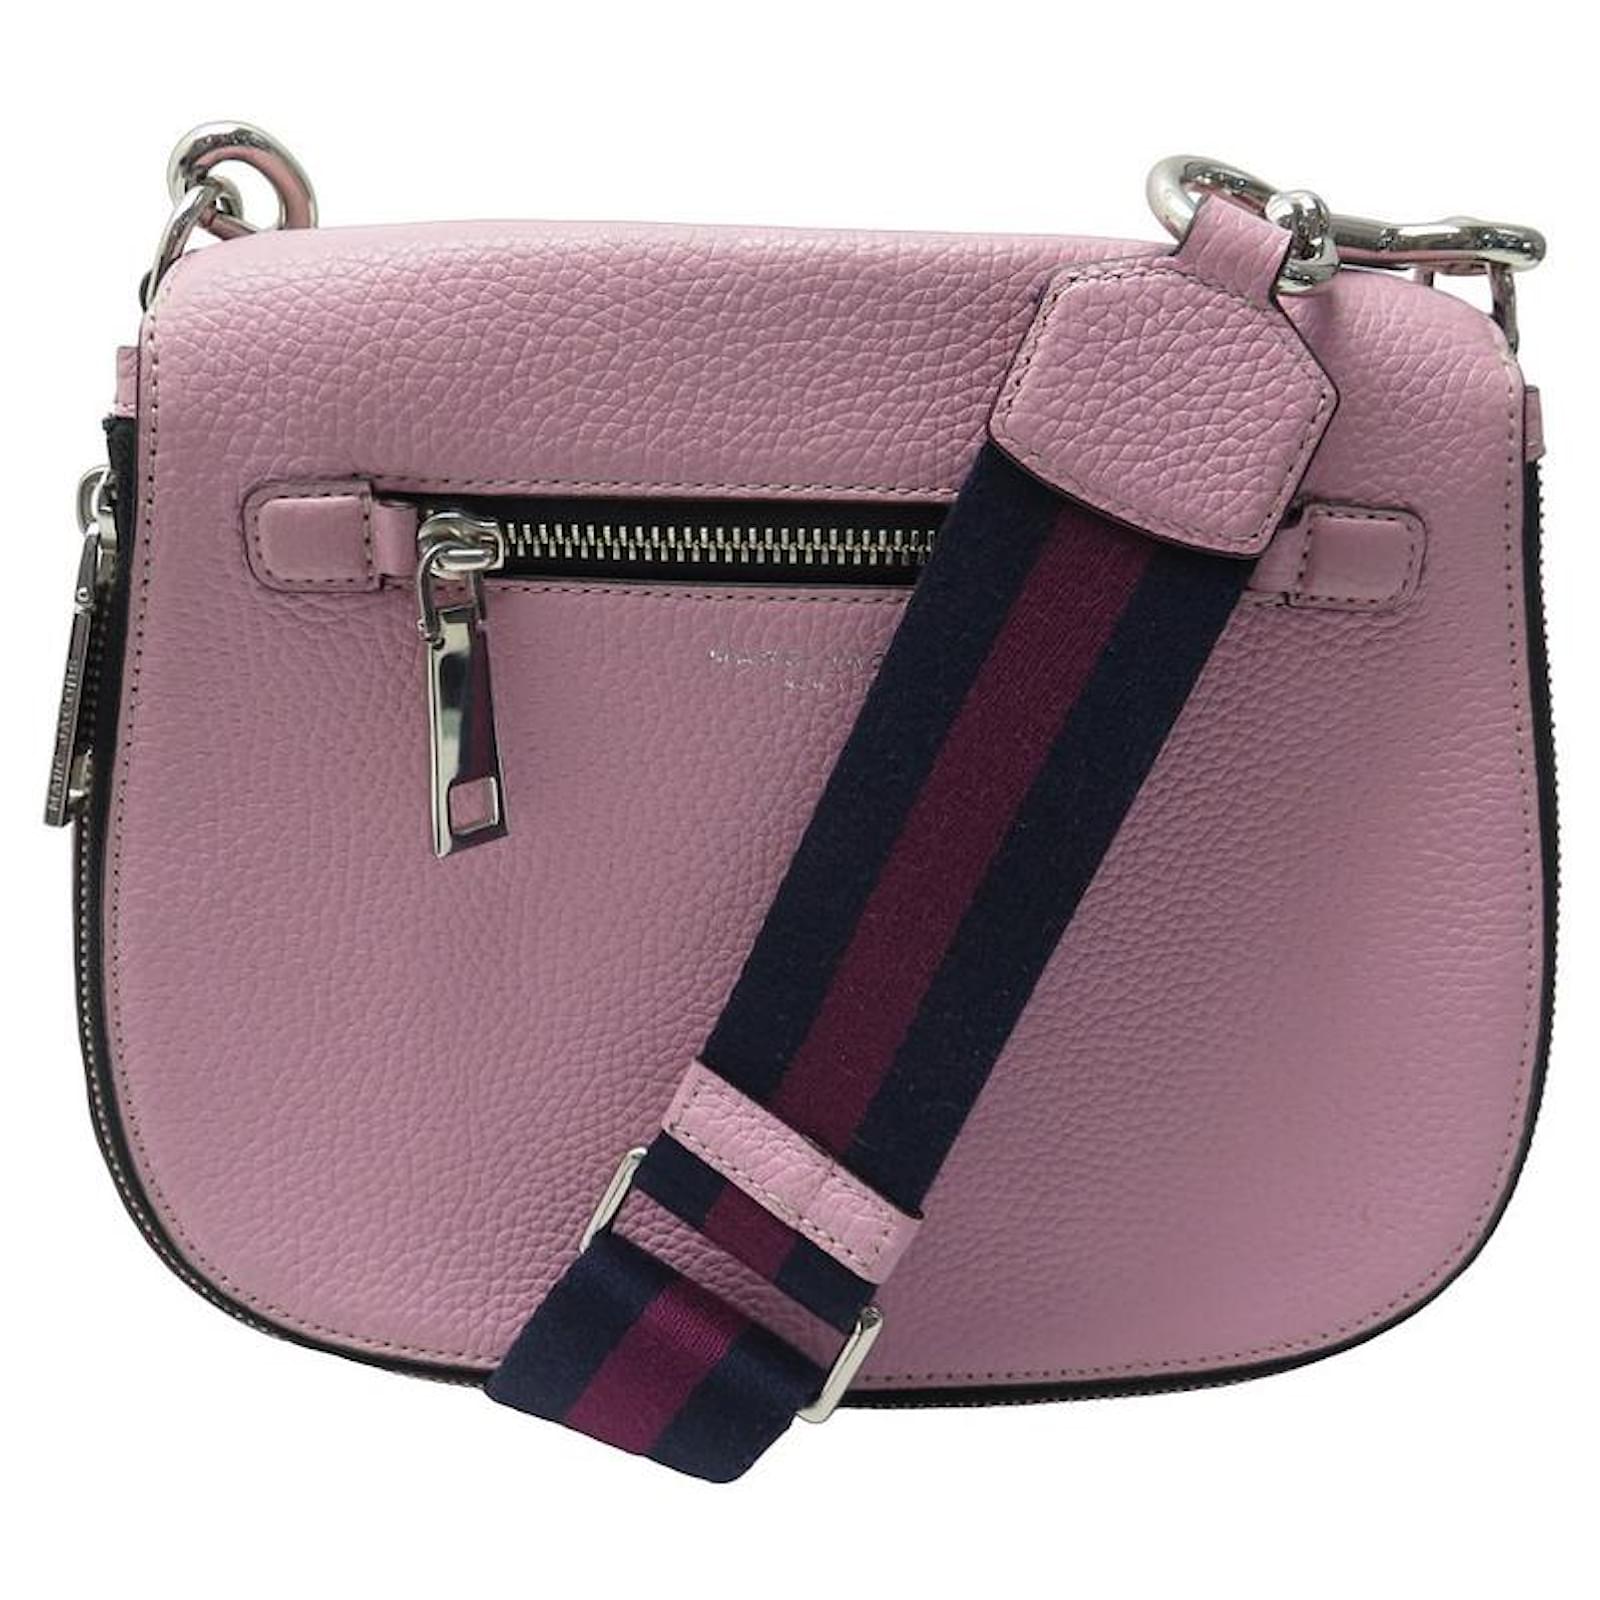 HAND BAG MARC JACOBS RECRUIT NOMAD BANDOULIERE PINK LEATHER PURSE